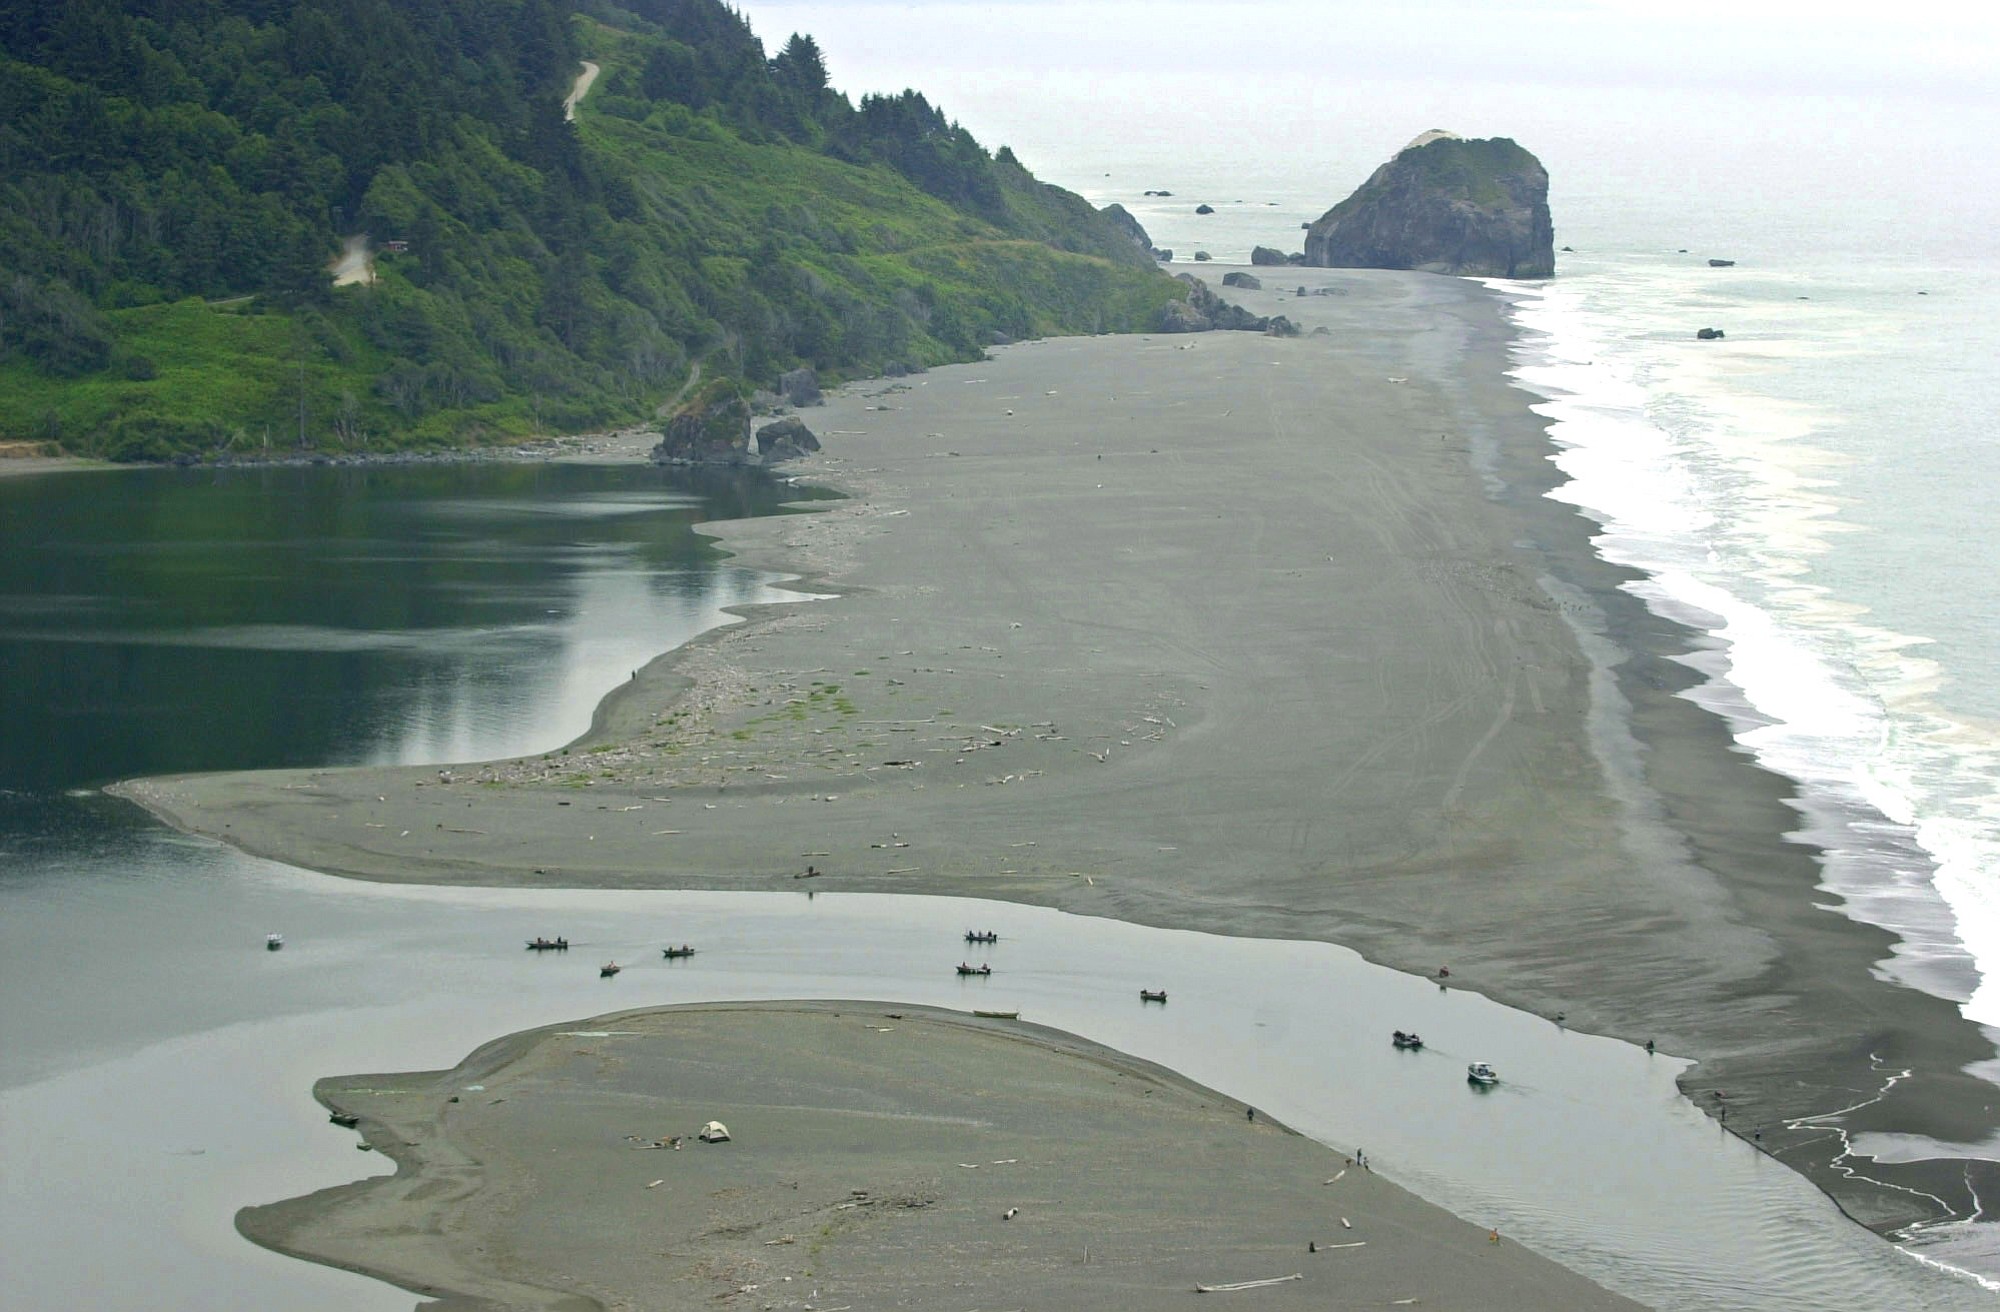 Associated Press files
Fishing boats float July 23, 2002, in the mouth of the Klamath River as it empties into the Pacific Ocean near Klamath, Calif. Deadly salmon parasites are thriving in the river, infecting nearly all the juvenile chinook salmon waiting to migrate to the ocean.